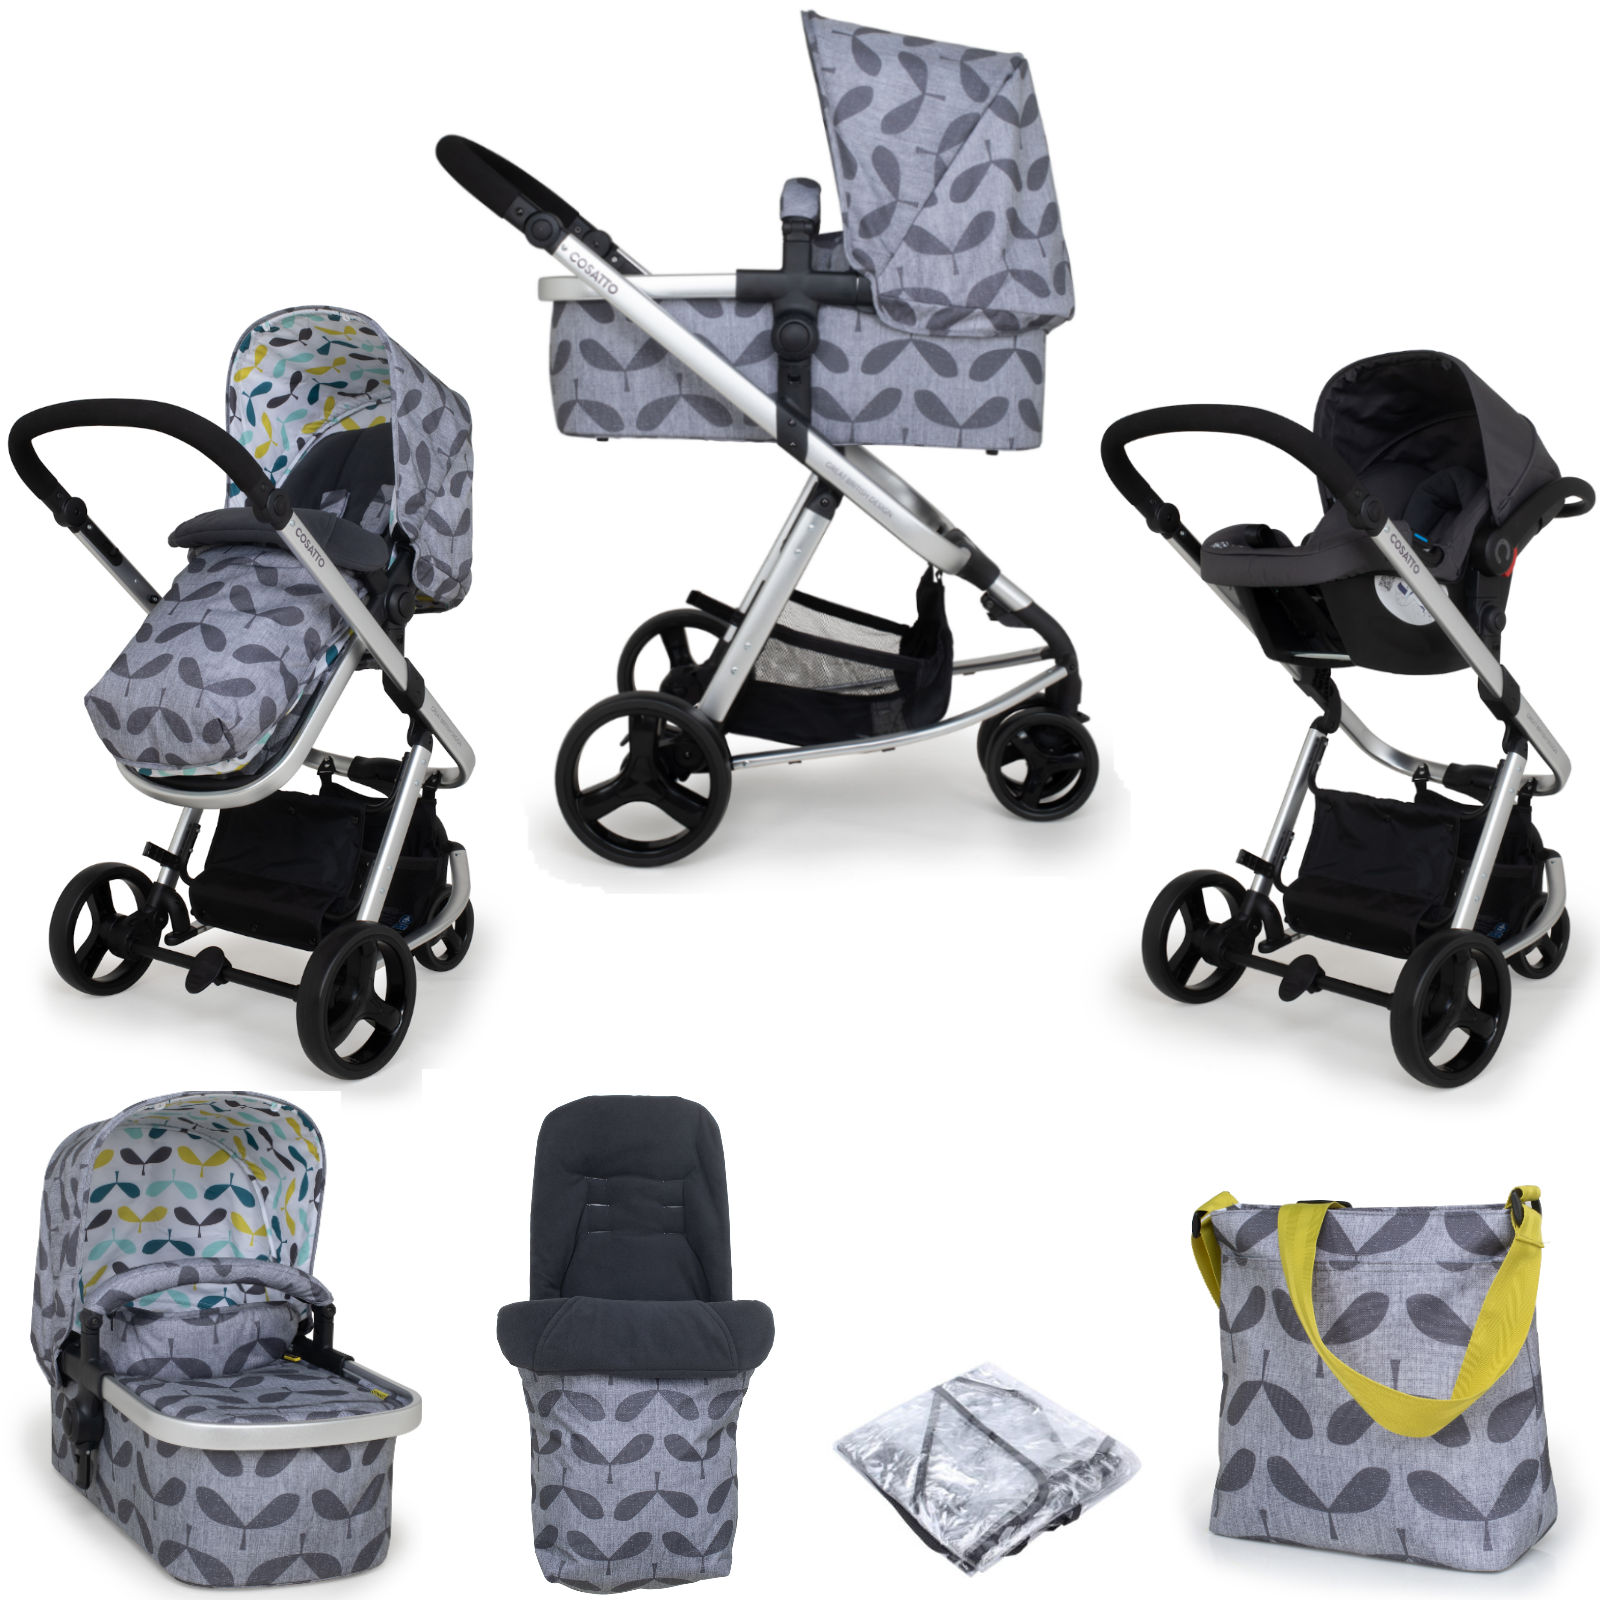 Cosatto Giggle 2 (Hold) Travel System with Carrycot - Seedling